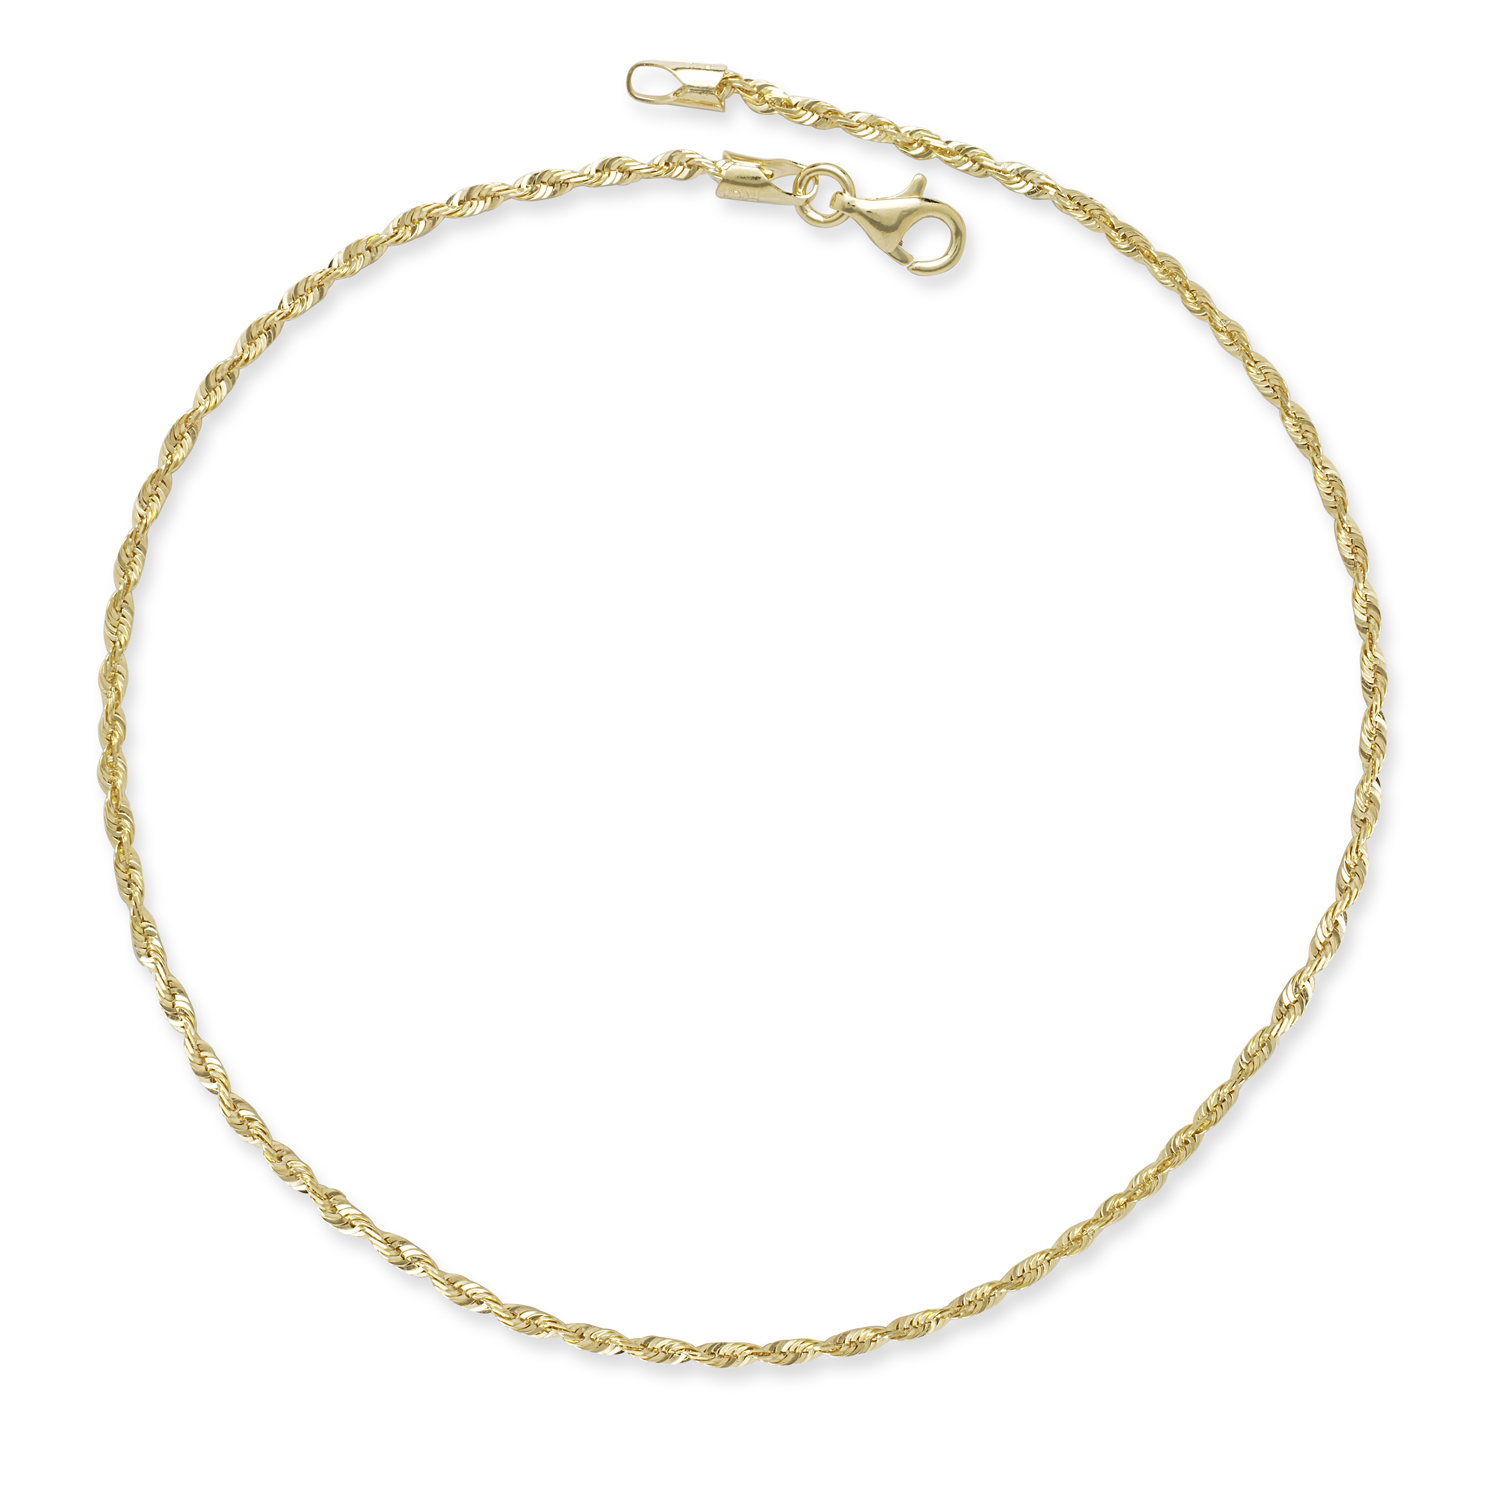 
14k Yellow Gold 2.0mm Shiny Solid Sparkle-Cut Rope Chain With Lobster Clasp Anklet - 10 Inch
